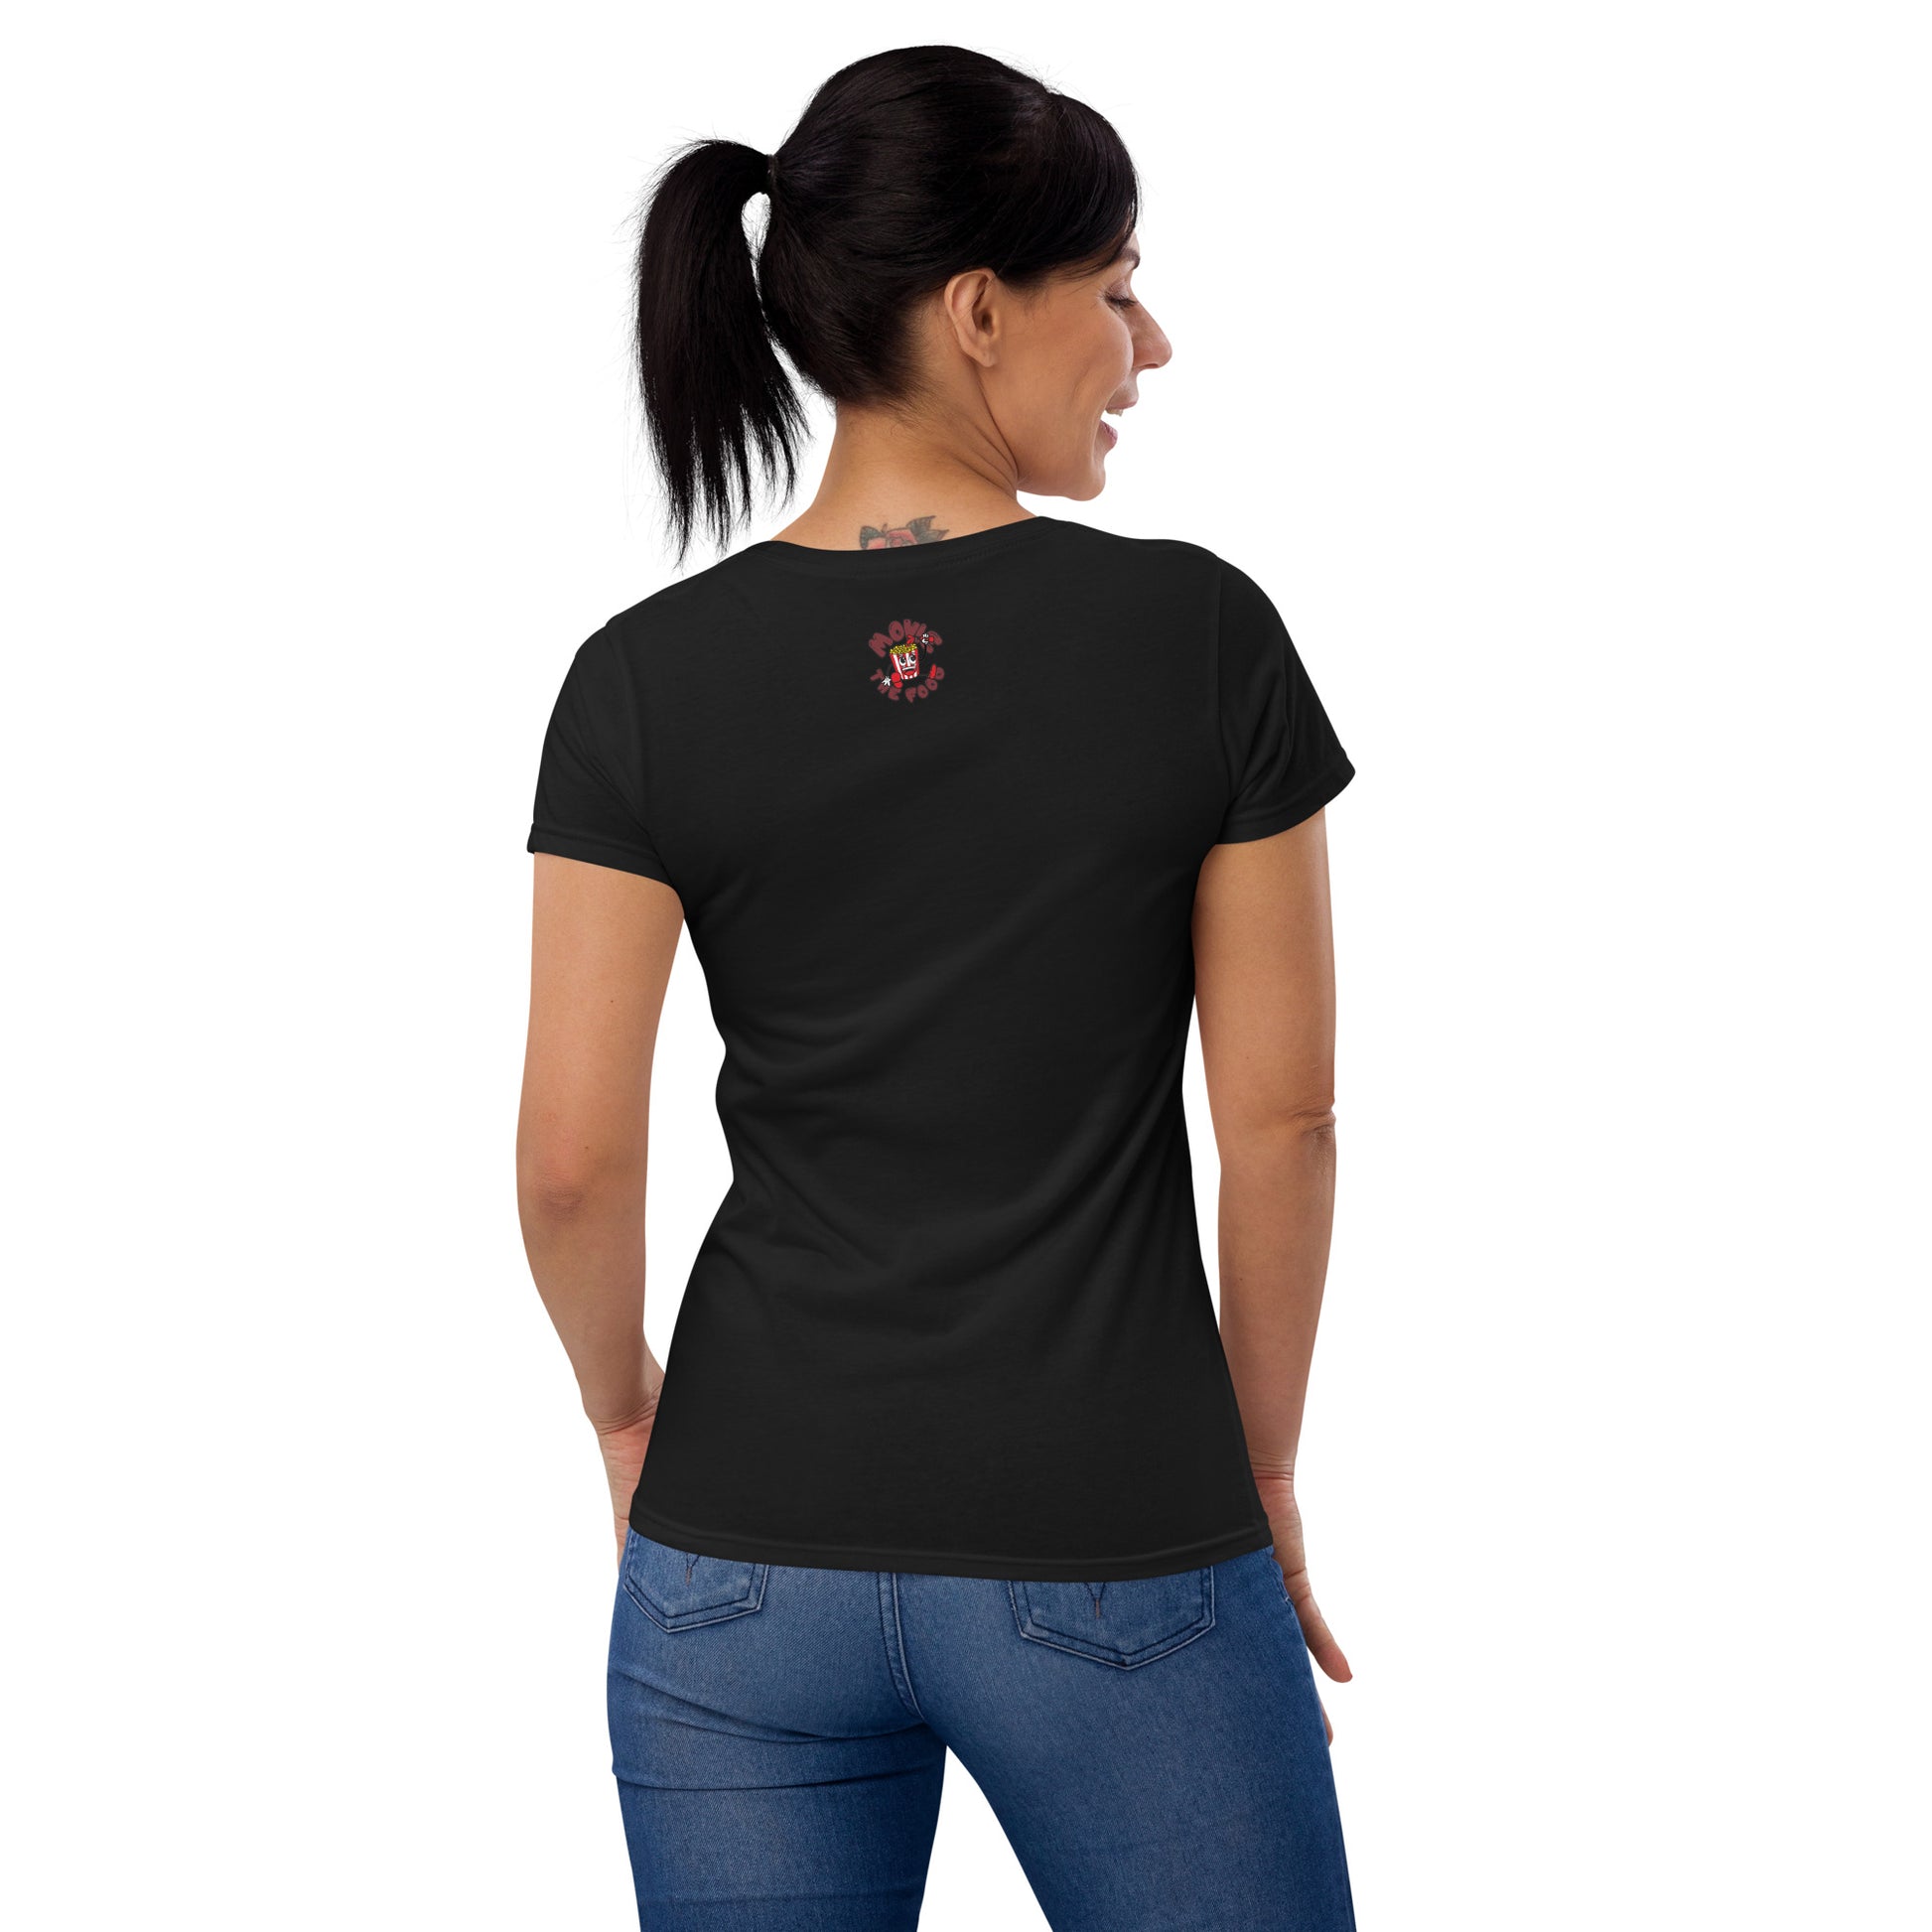 Movie The Food - Mango Unchained Women's T-Shirt - Black - Model Back